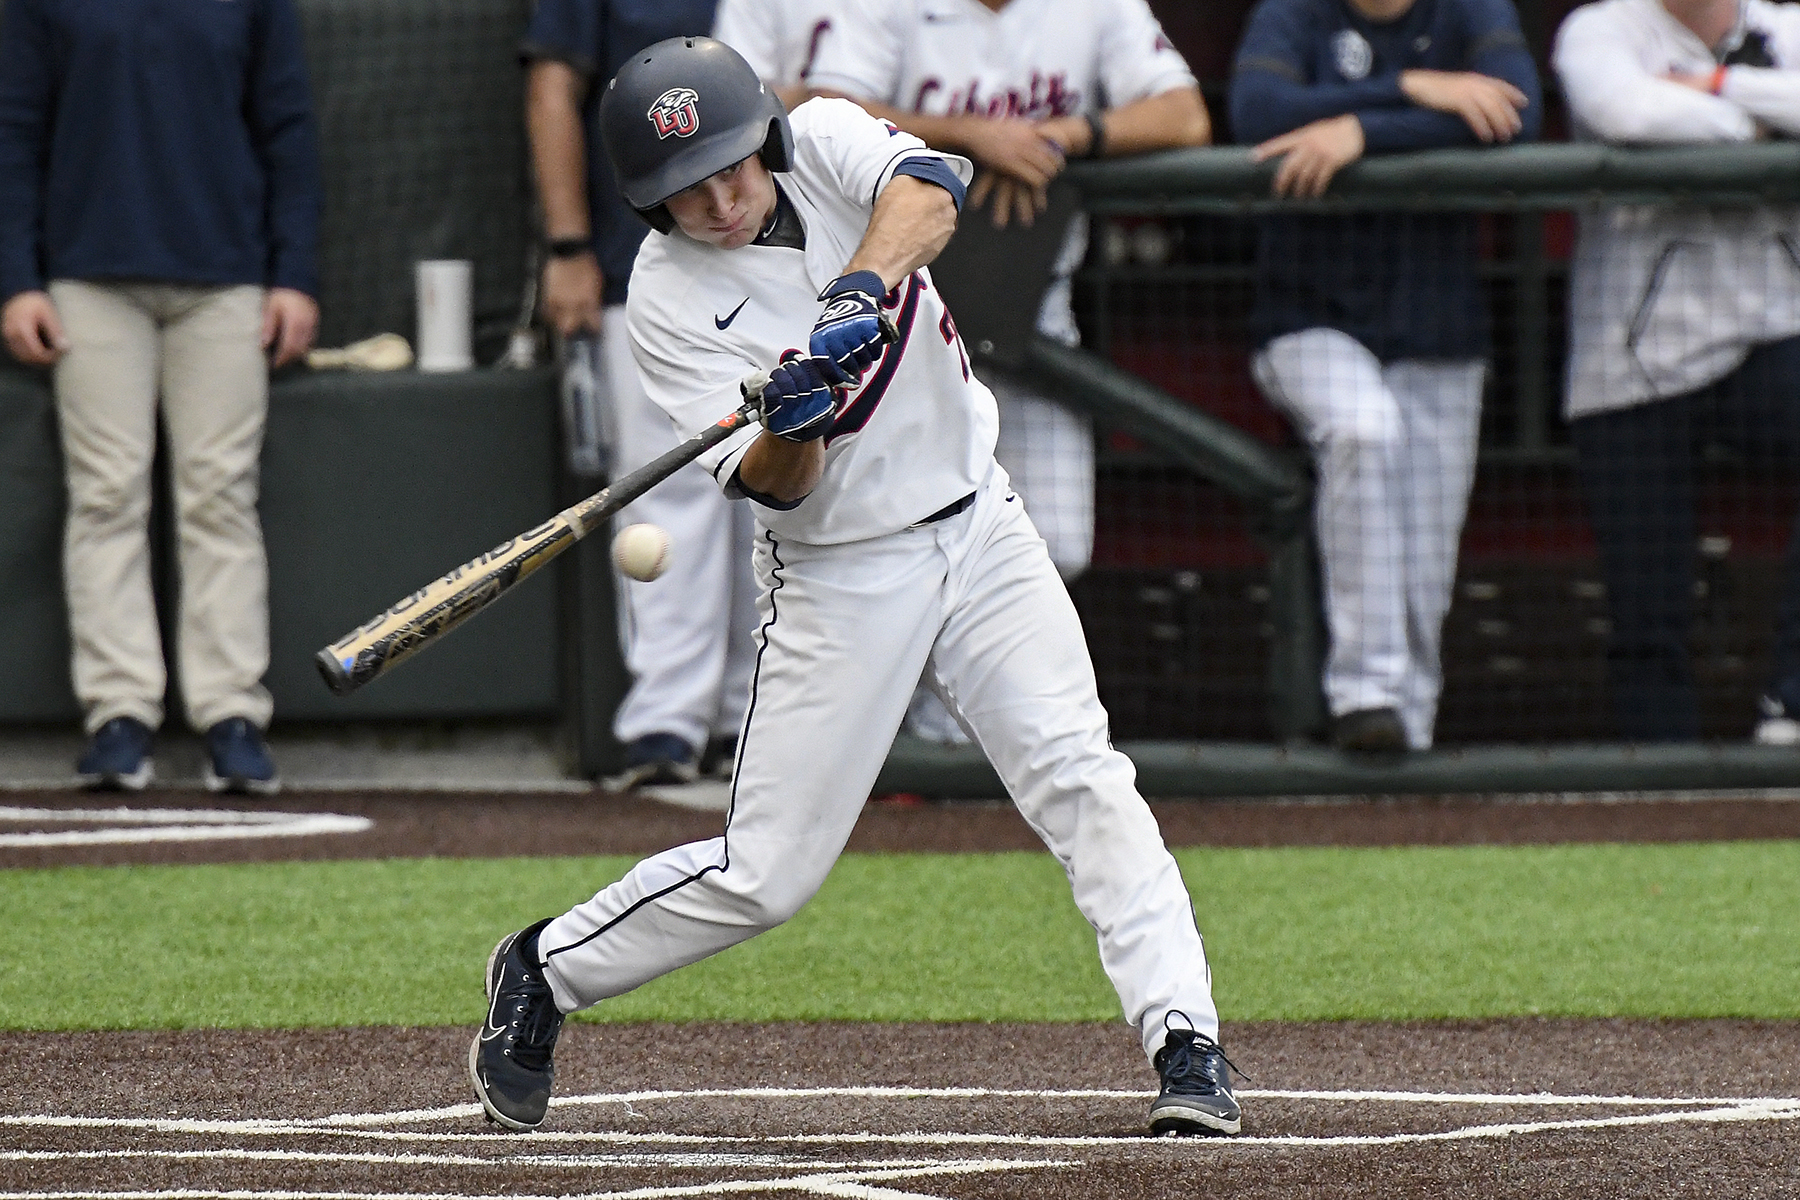 Liberty projected as ASUN representative in NCAA Regional projections this week